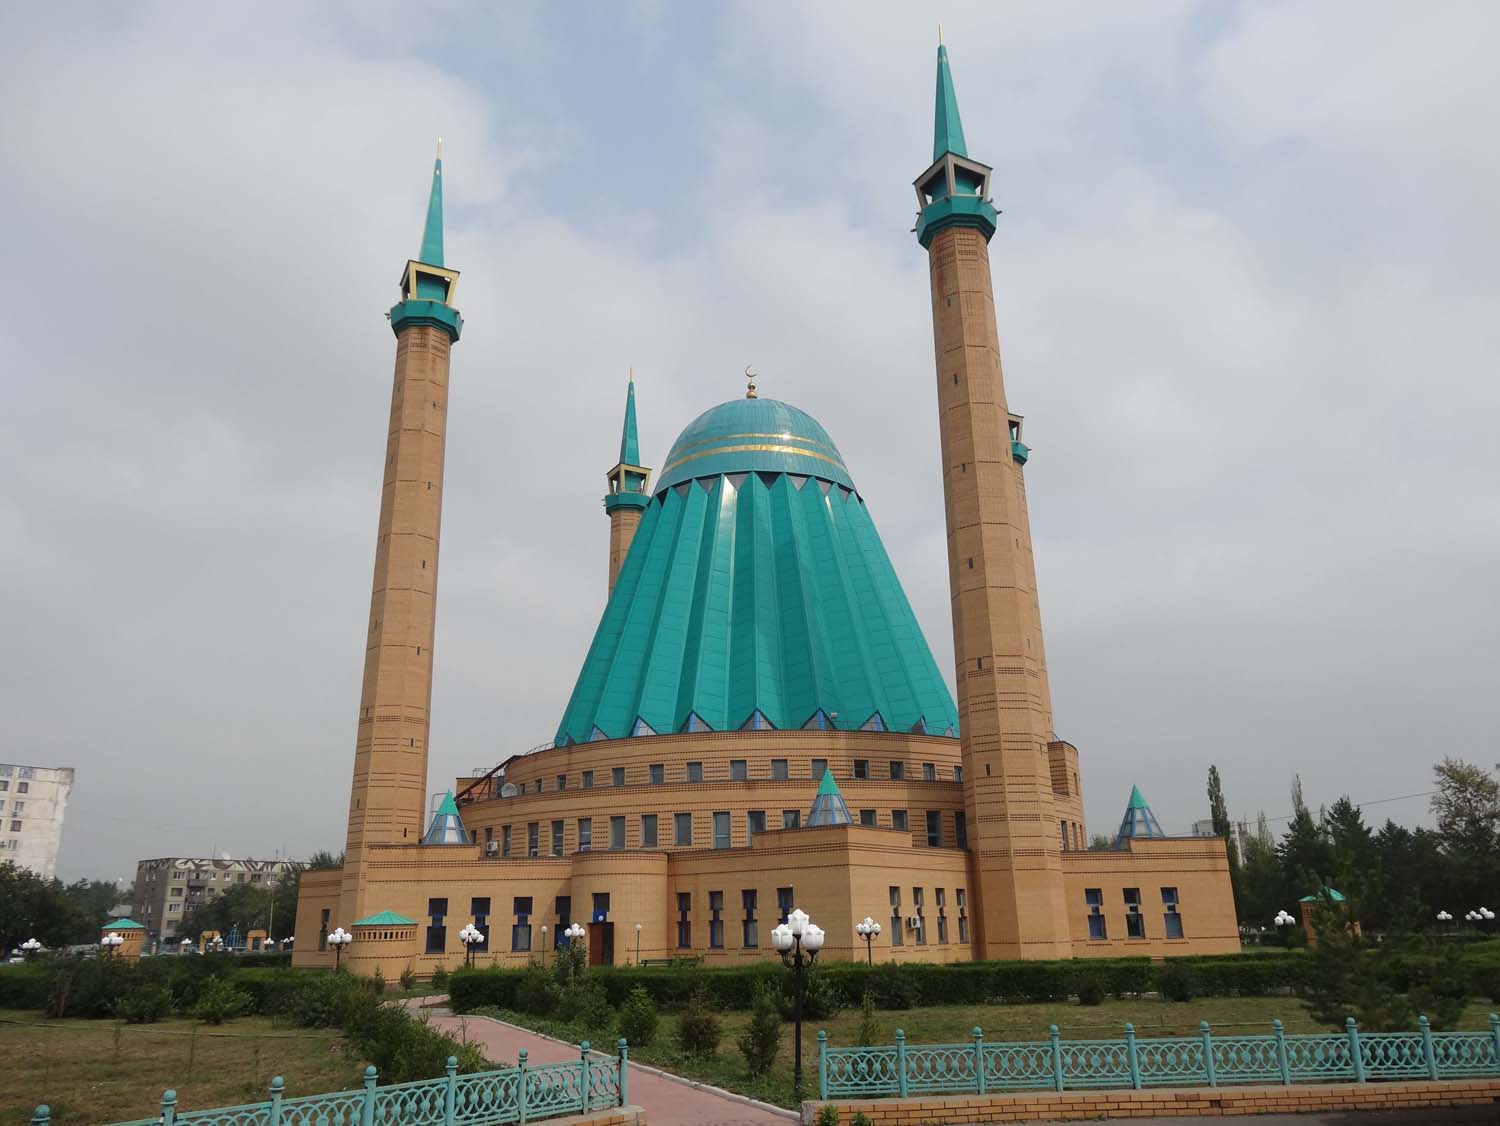 this mosque has many nicknames due to its looks (darth father and shuttle cock)